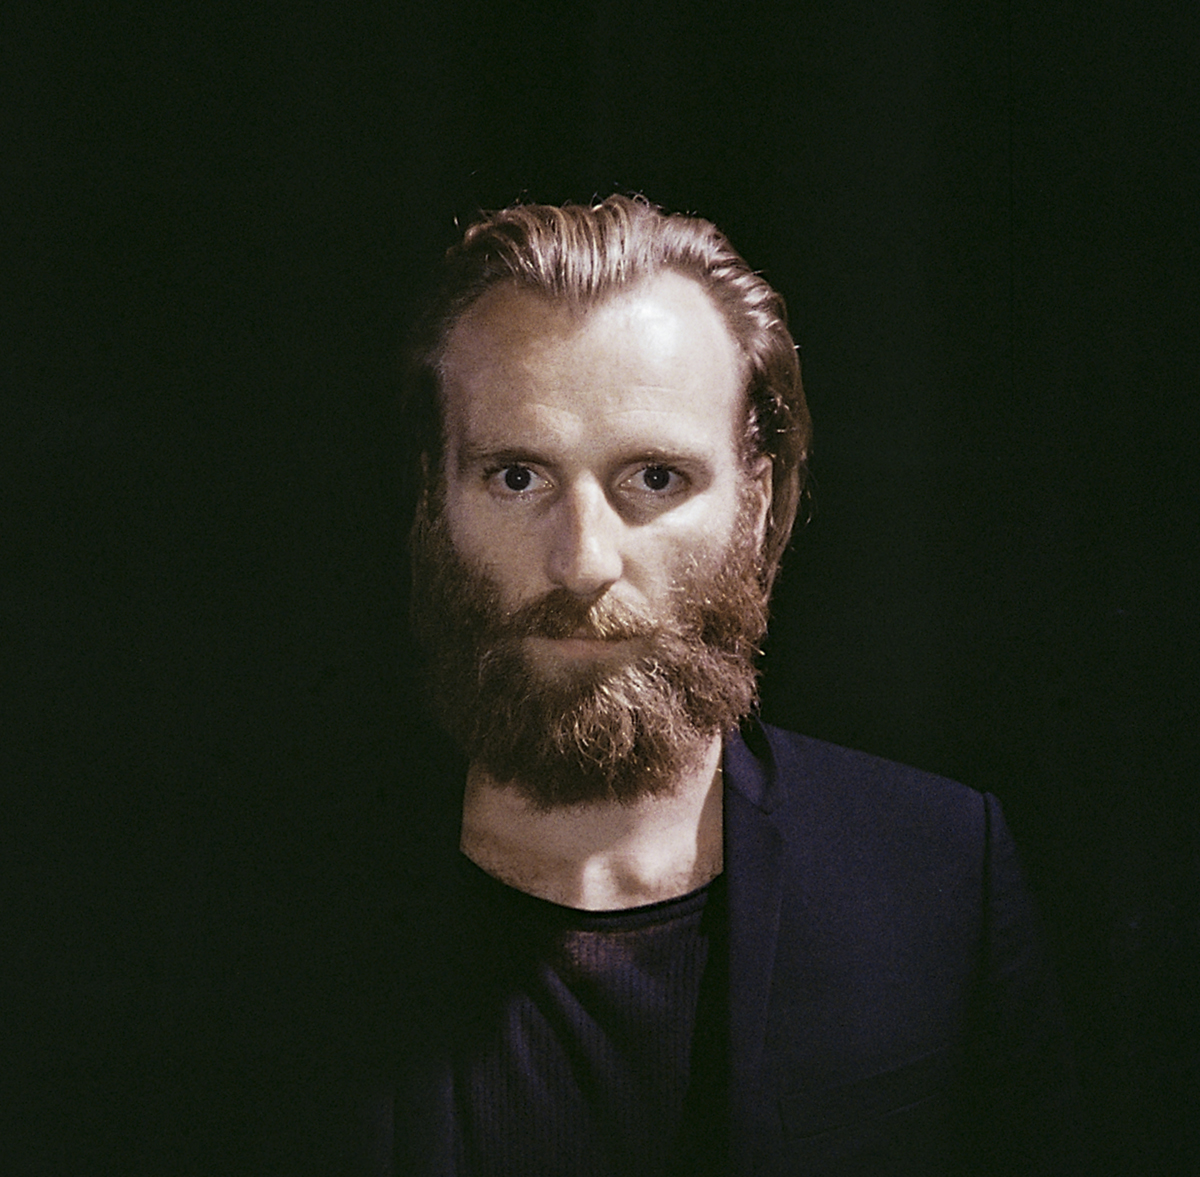 Ben Frost announces new album 'The Centre Cannot Hold', shares first video